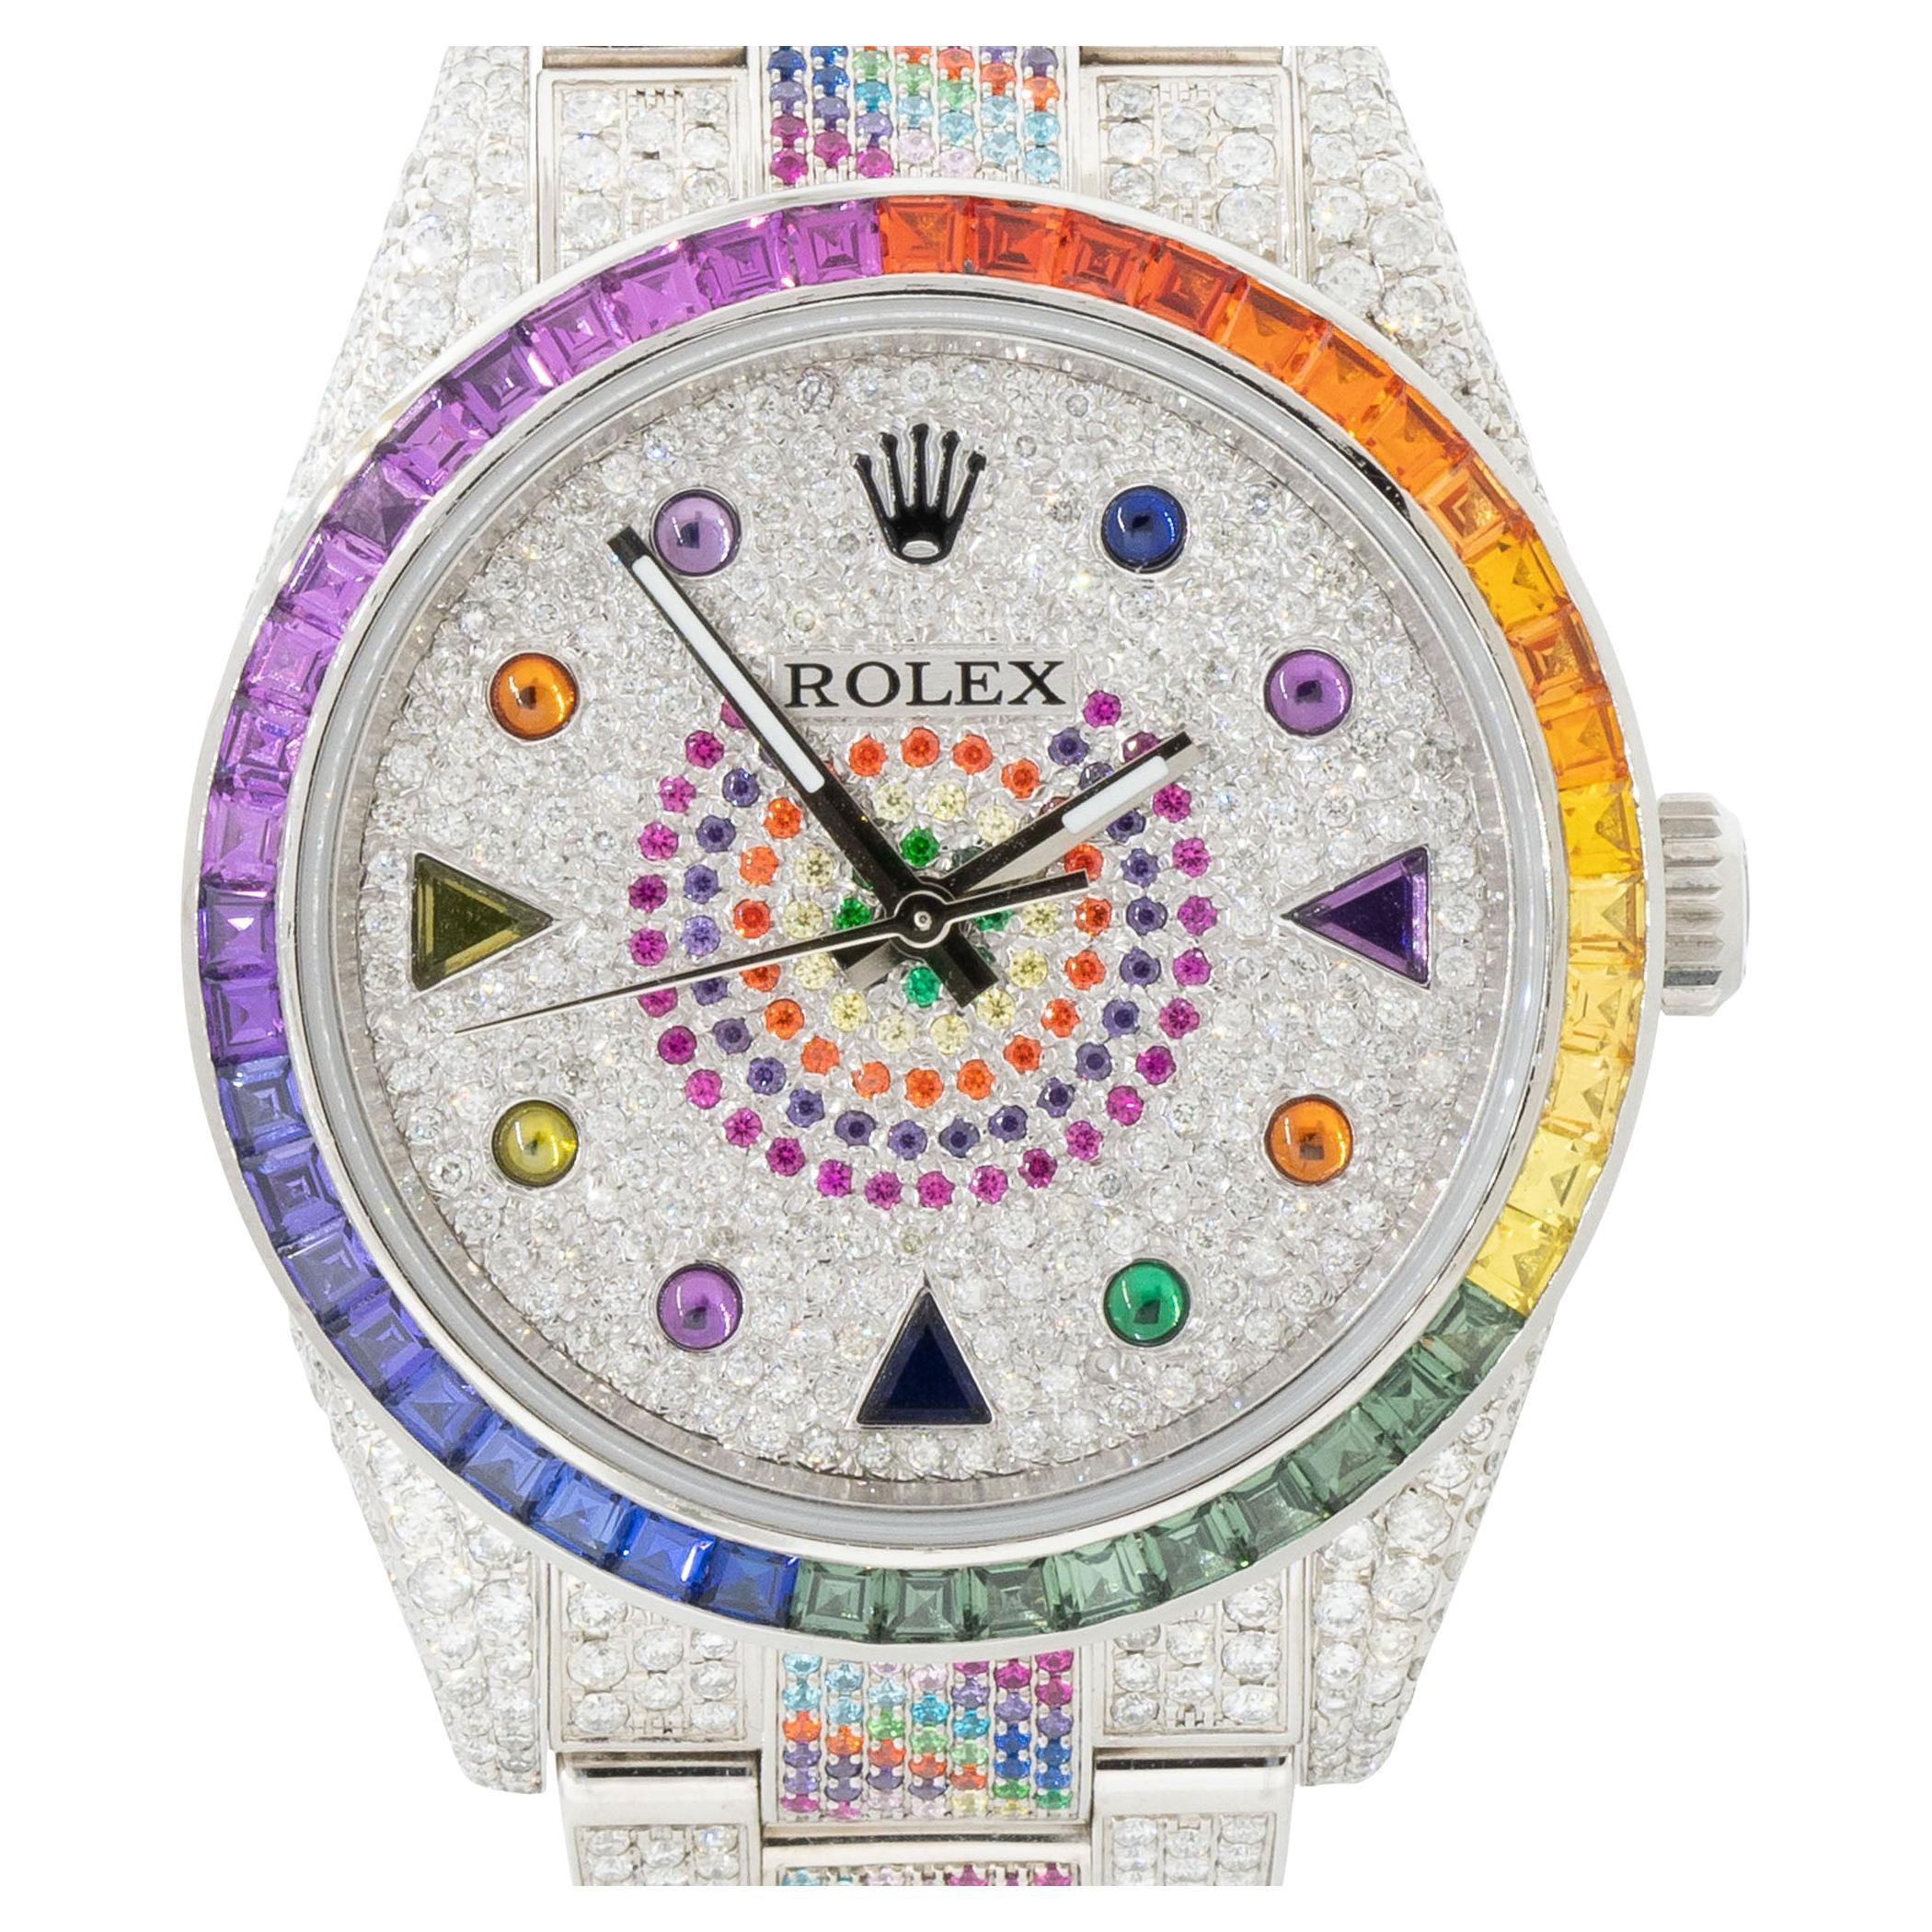 Rolex 114300 Oyster Perpetual Stainless Steel All Diamond "Rainbow" Watch